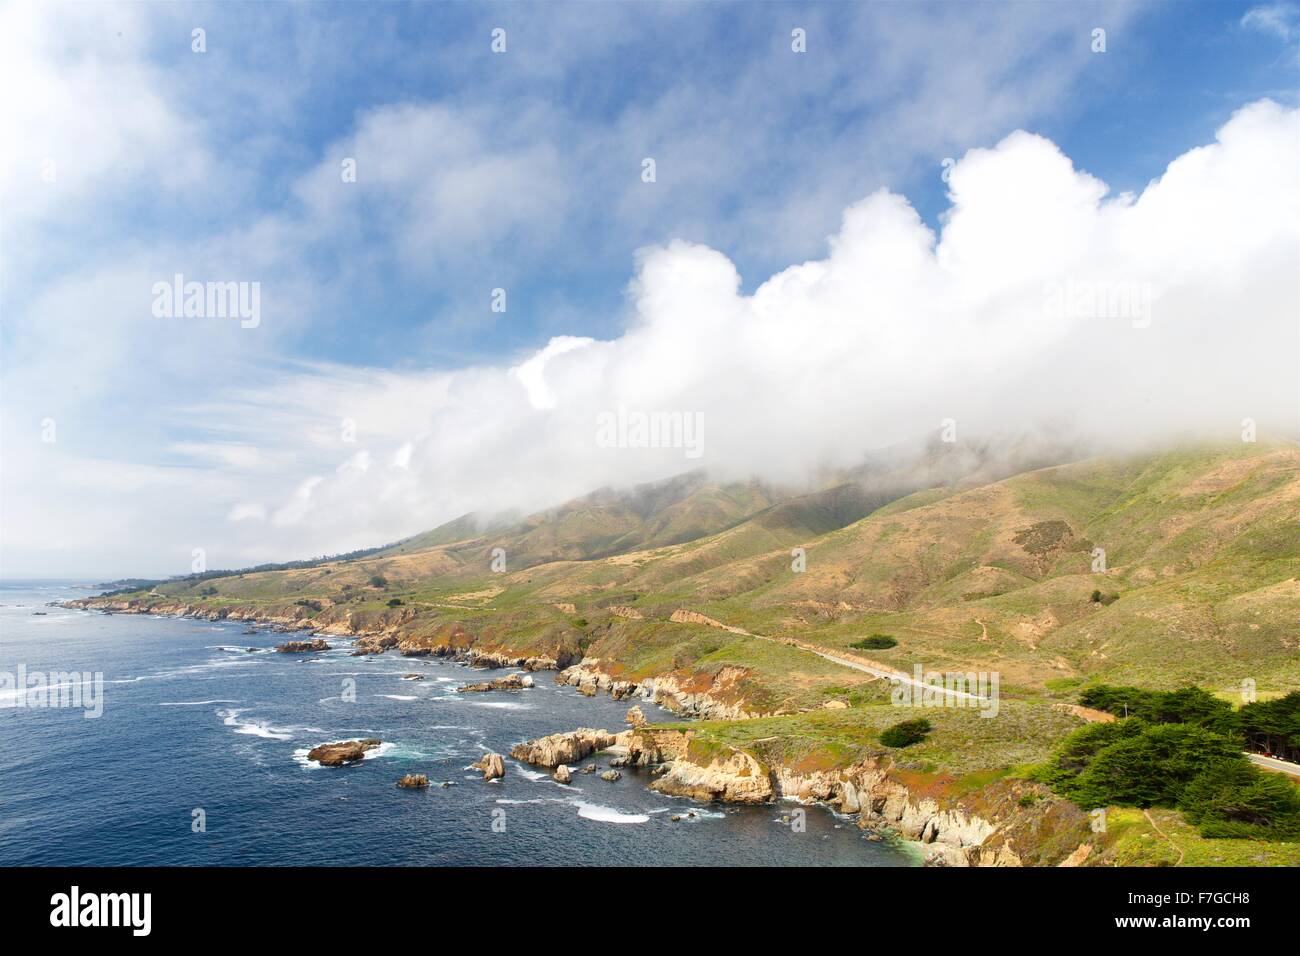 Big Sur on the Central Coast of California. Stock Photo